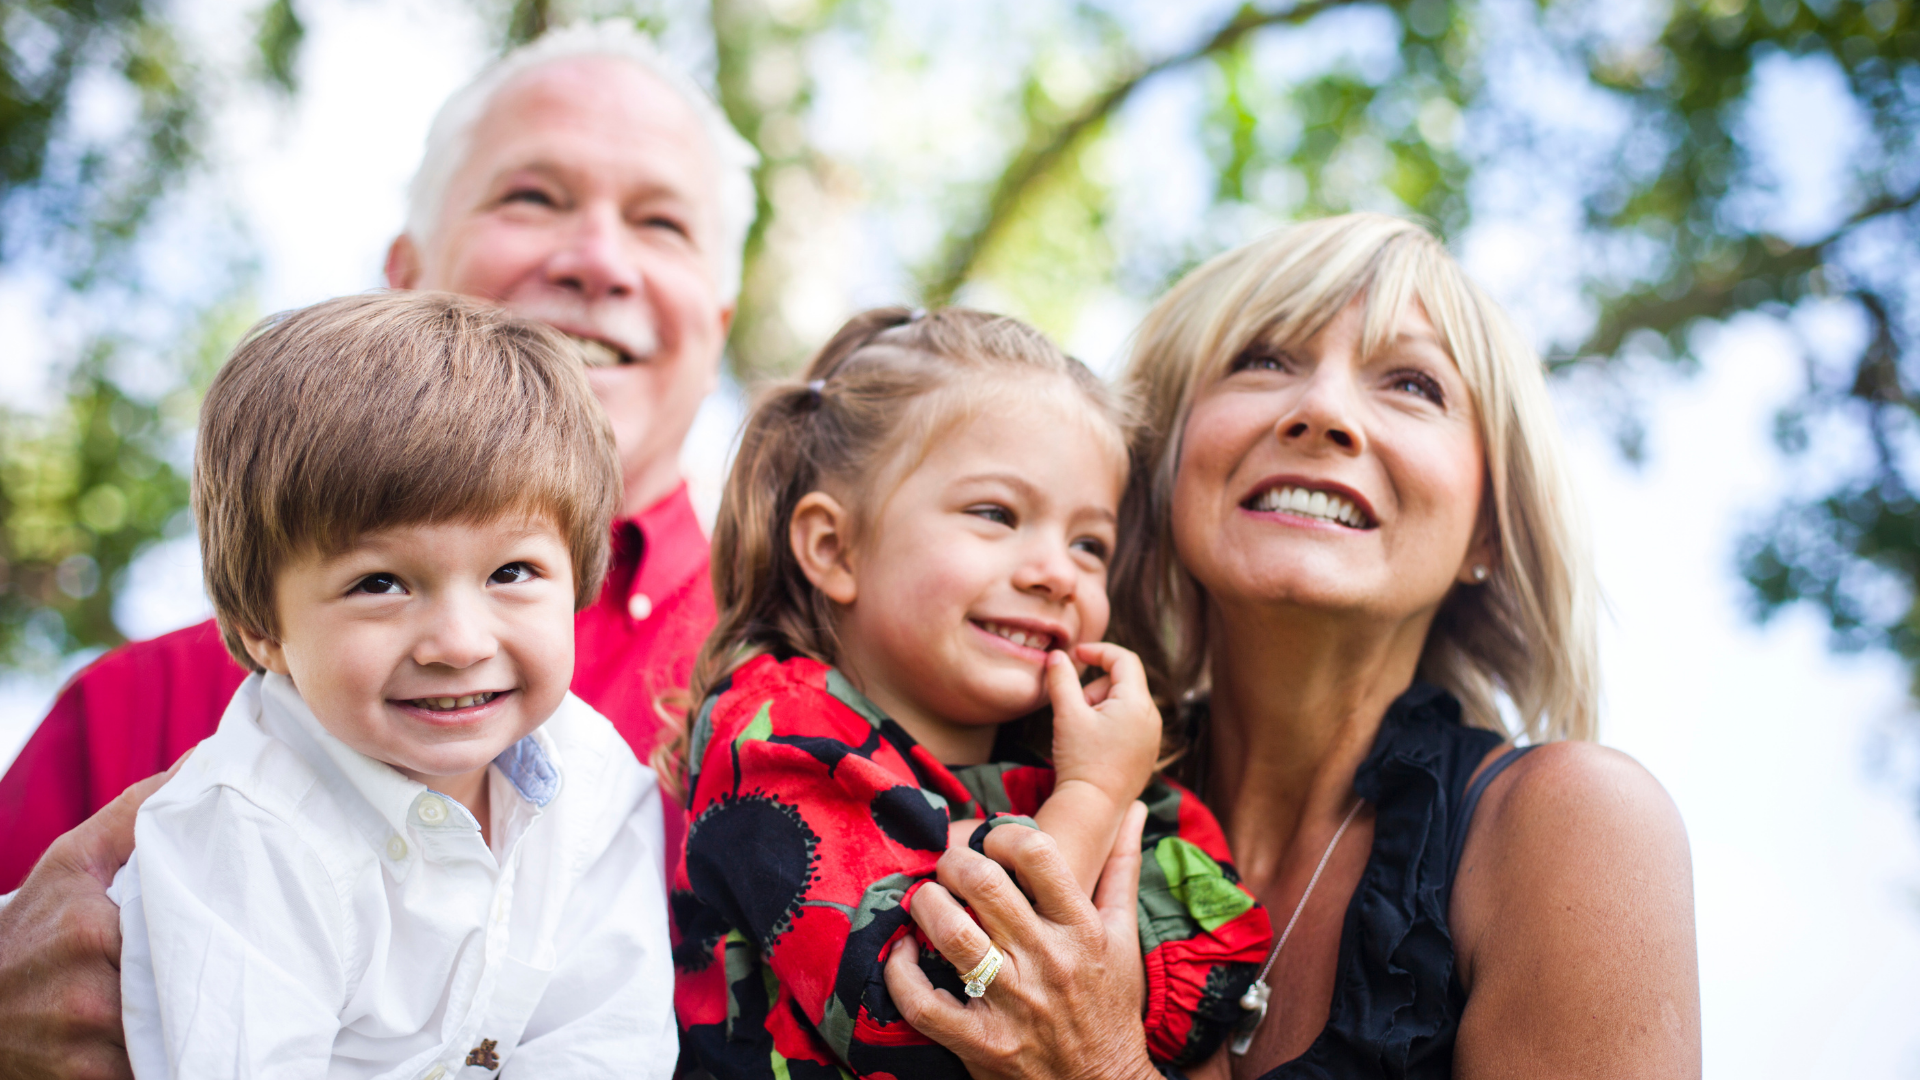 Growing Together: Benefits Of Creating Connections Between Children And Grandparents